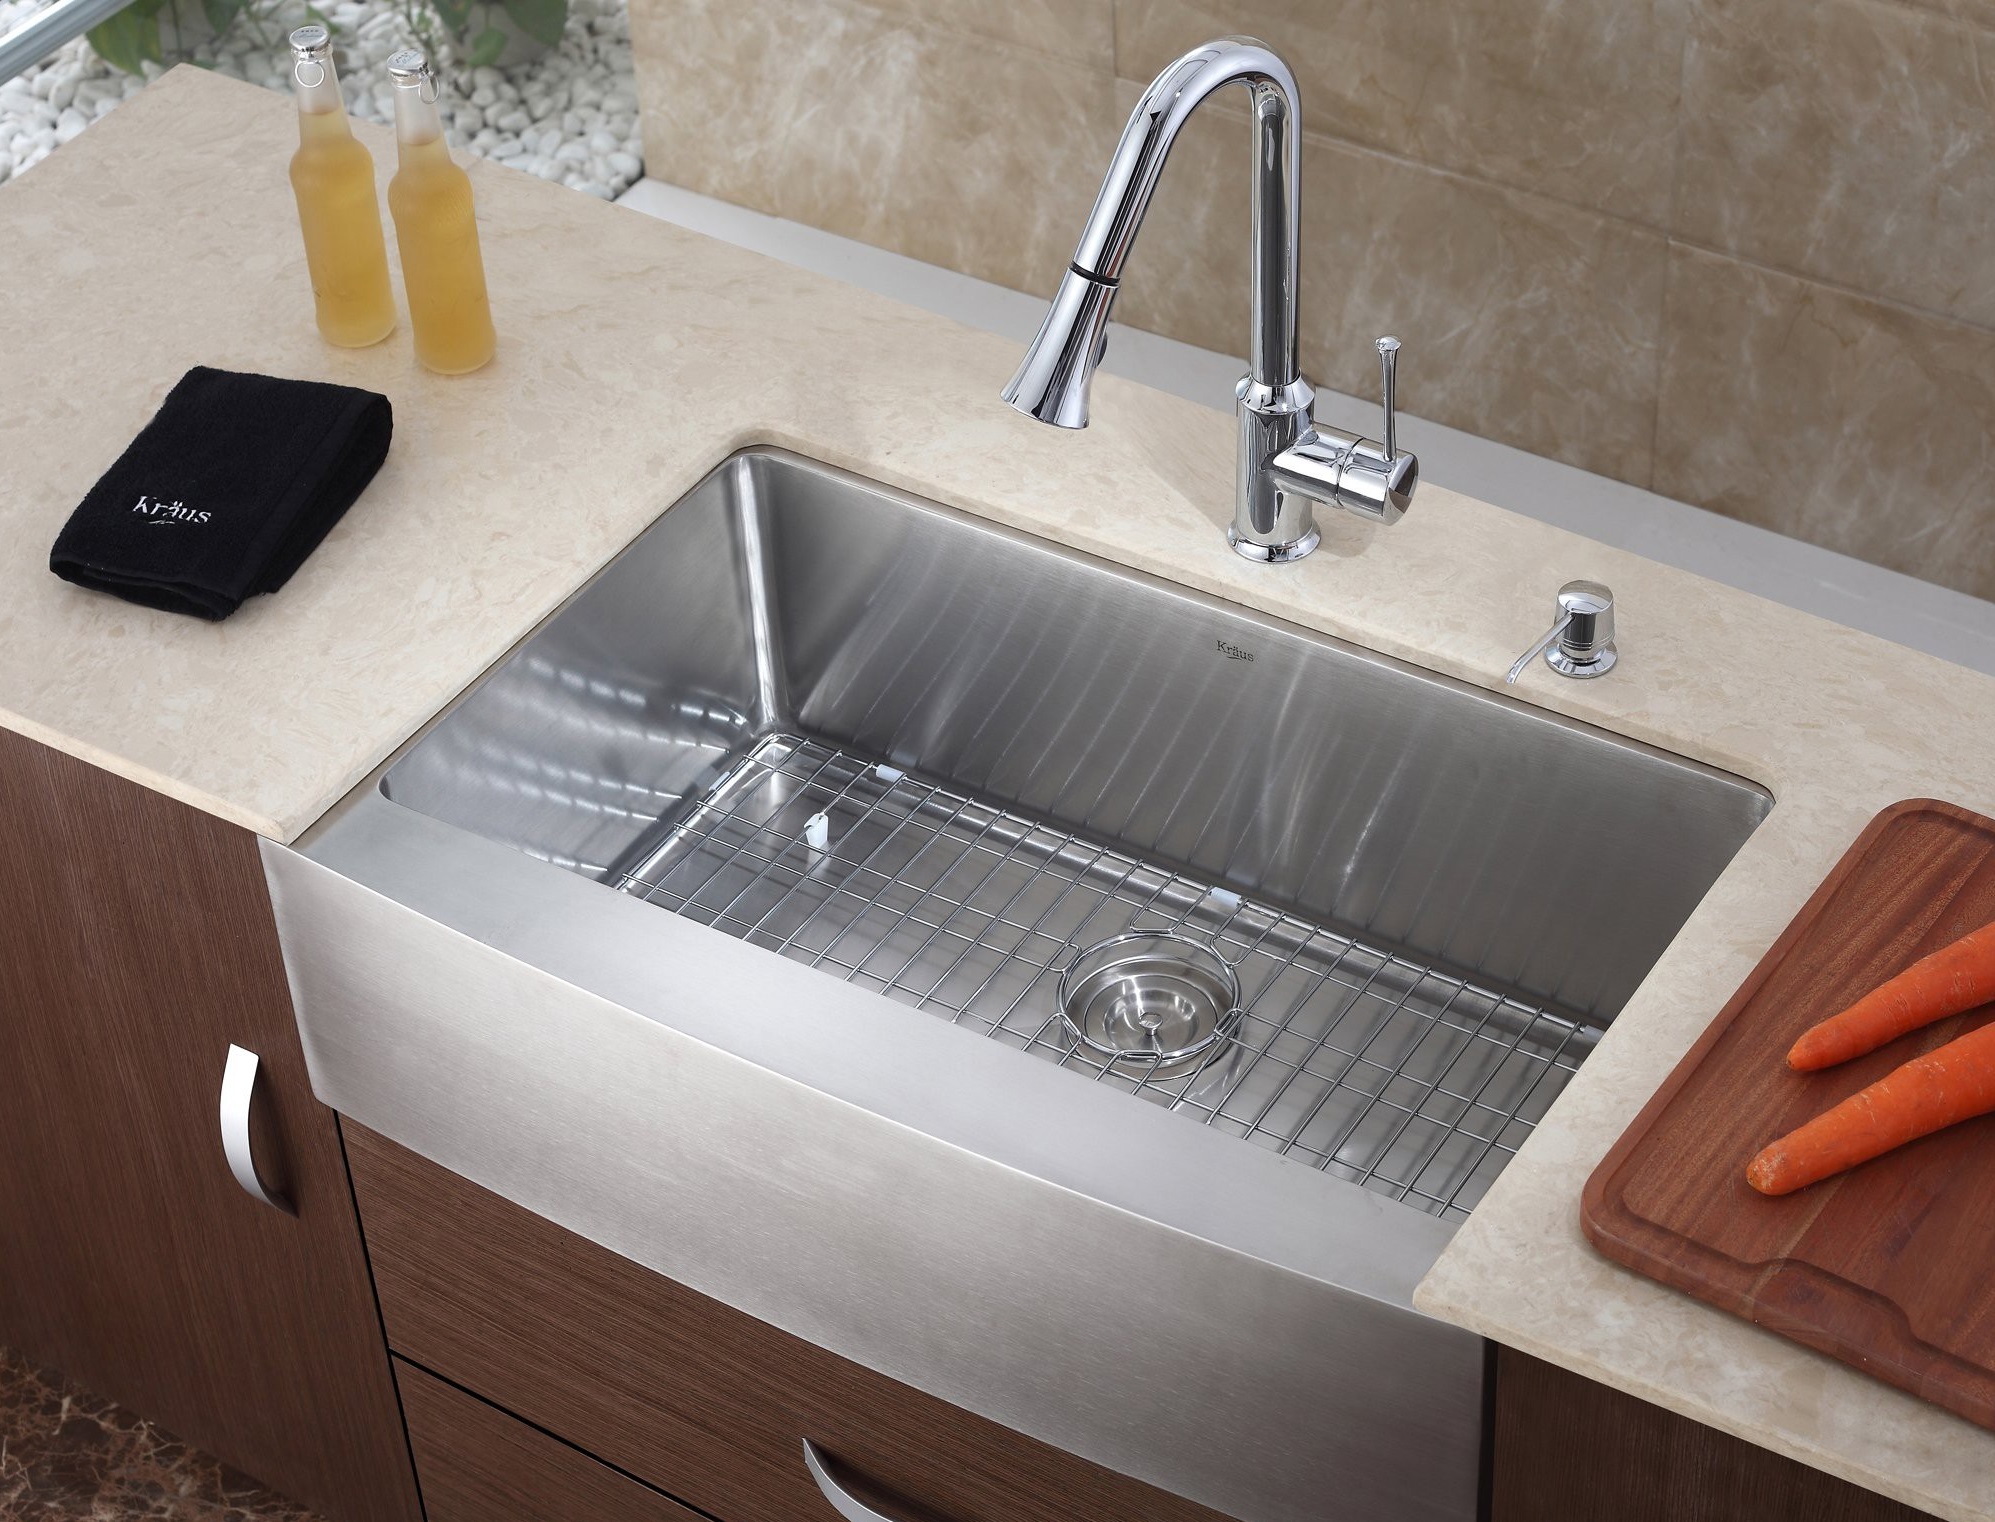 Glossy Sink Steel Wide Glossy Sink And Stainless Steel Kitchen Faucet On Wooden Counter And Quartz Top  10 Stainless Steel Kitchen Faucet To Complement The Functionality